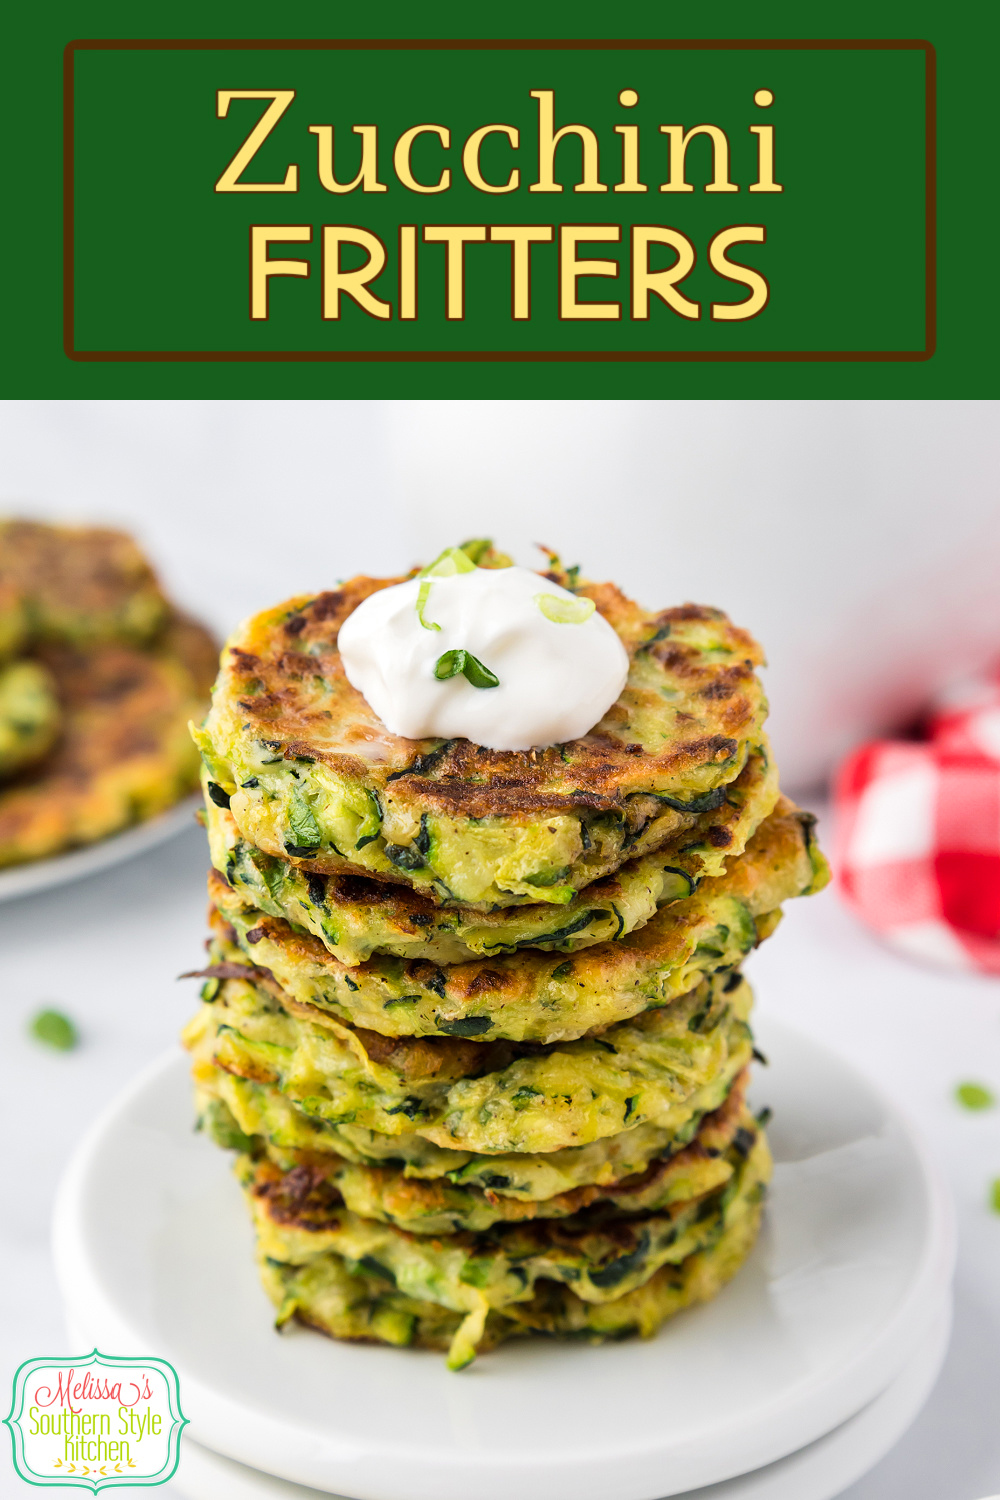 These crispy Zucchini Fritters can be served as an appetizer or a side dish with Southern comeback sauce or Ranch dressing for dipping. #zucchini #zucchinirecipes #zucchinifritters #easyzucchinifritters #southernzucchinirecipes